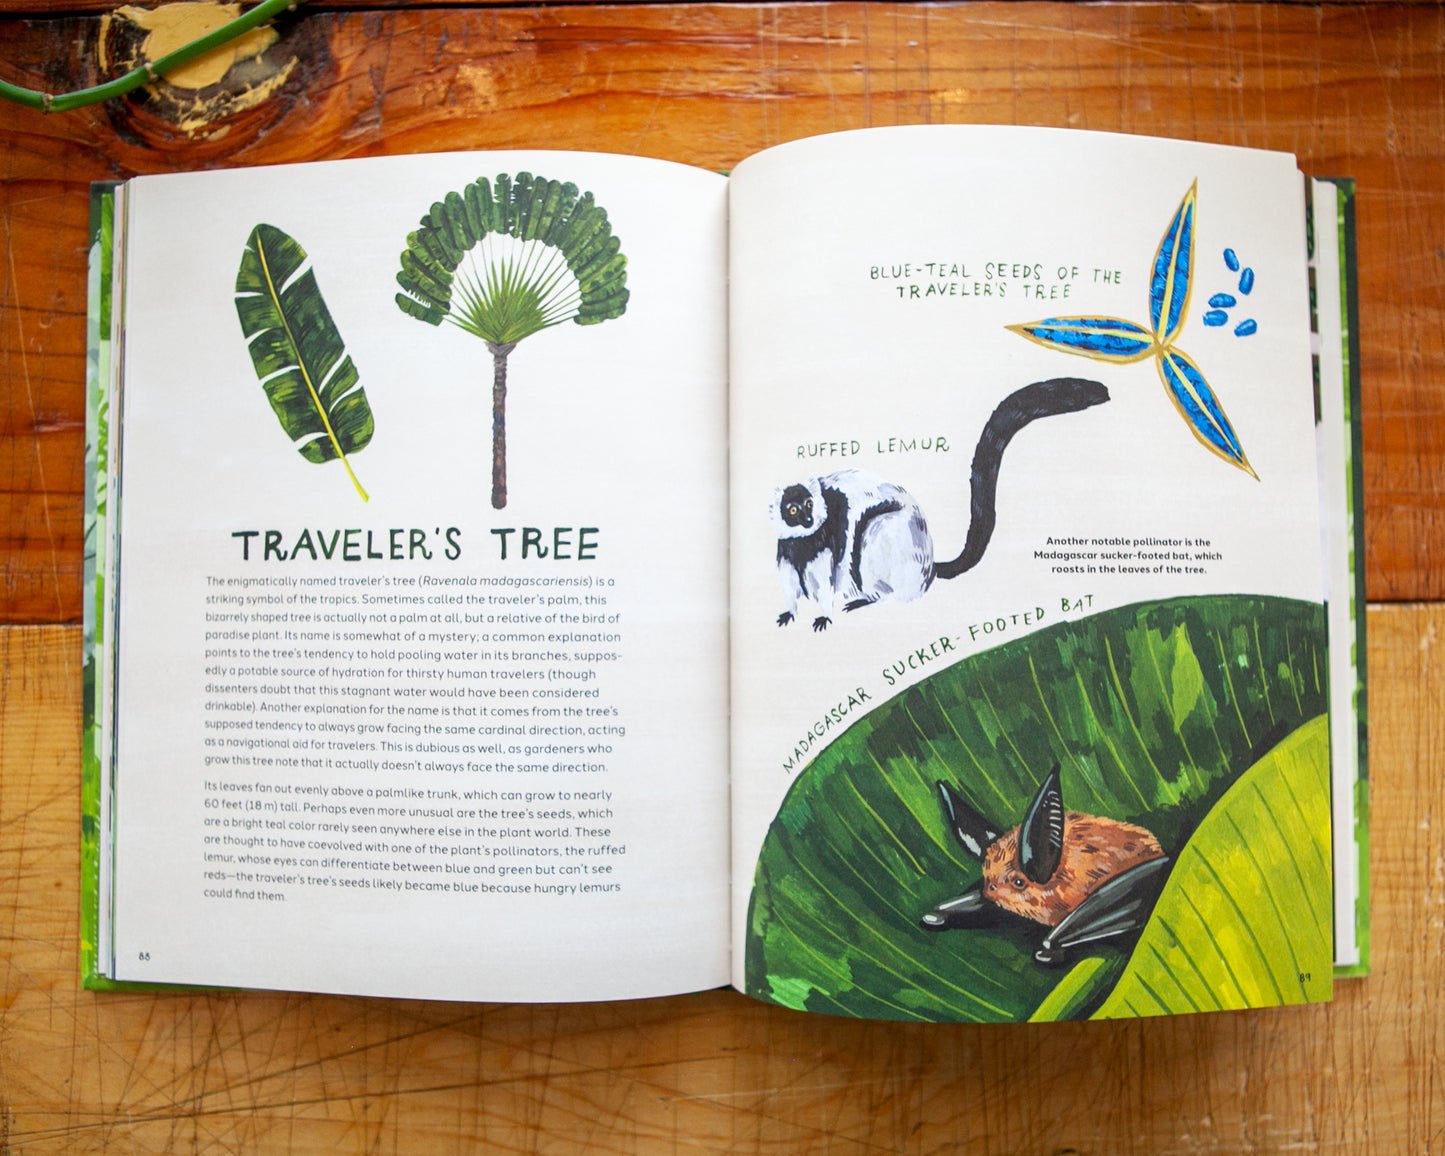 Trees: An Illustrated Celebration (signed copy)